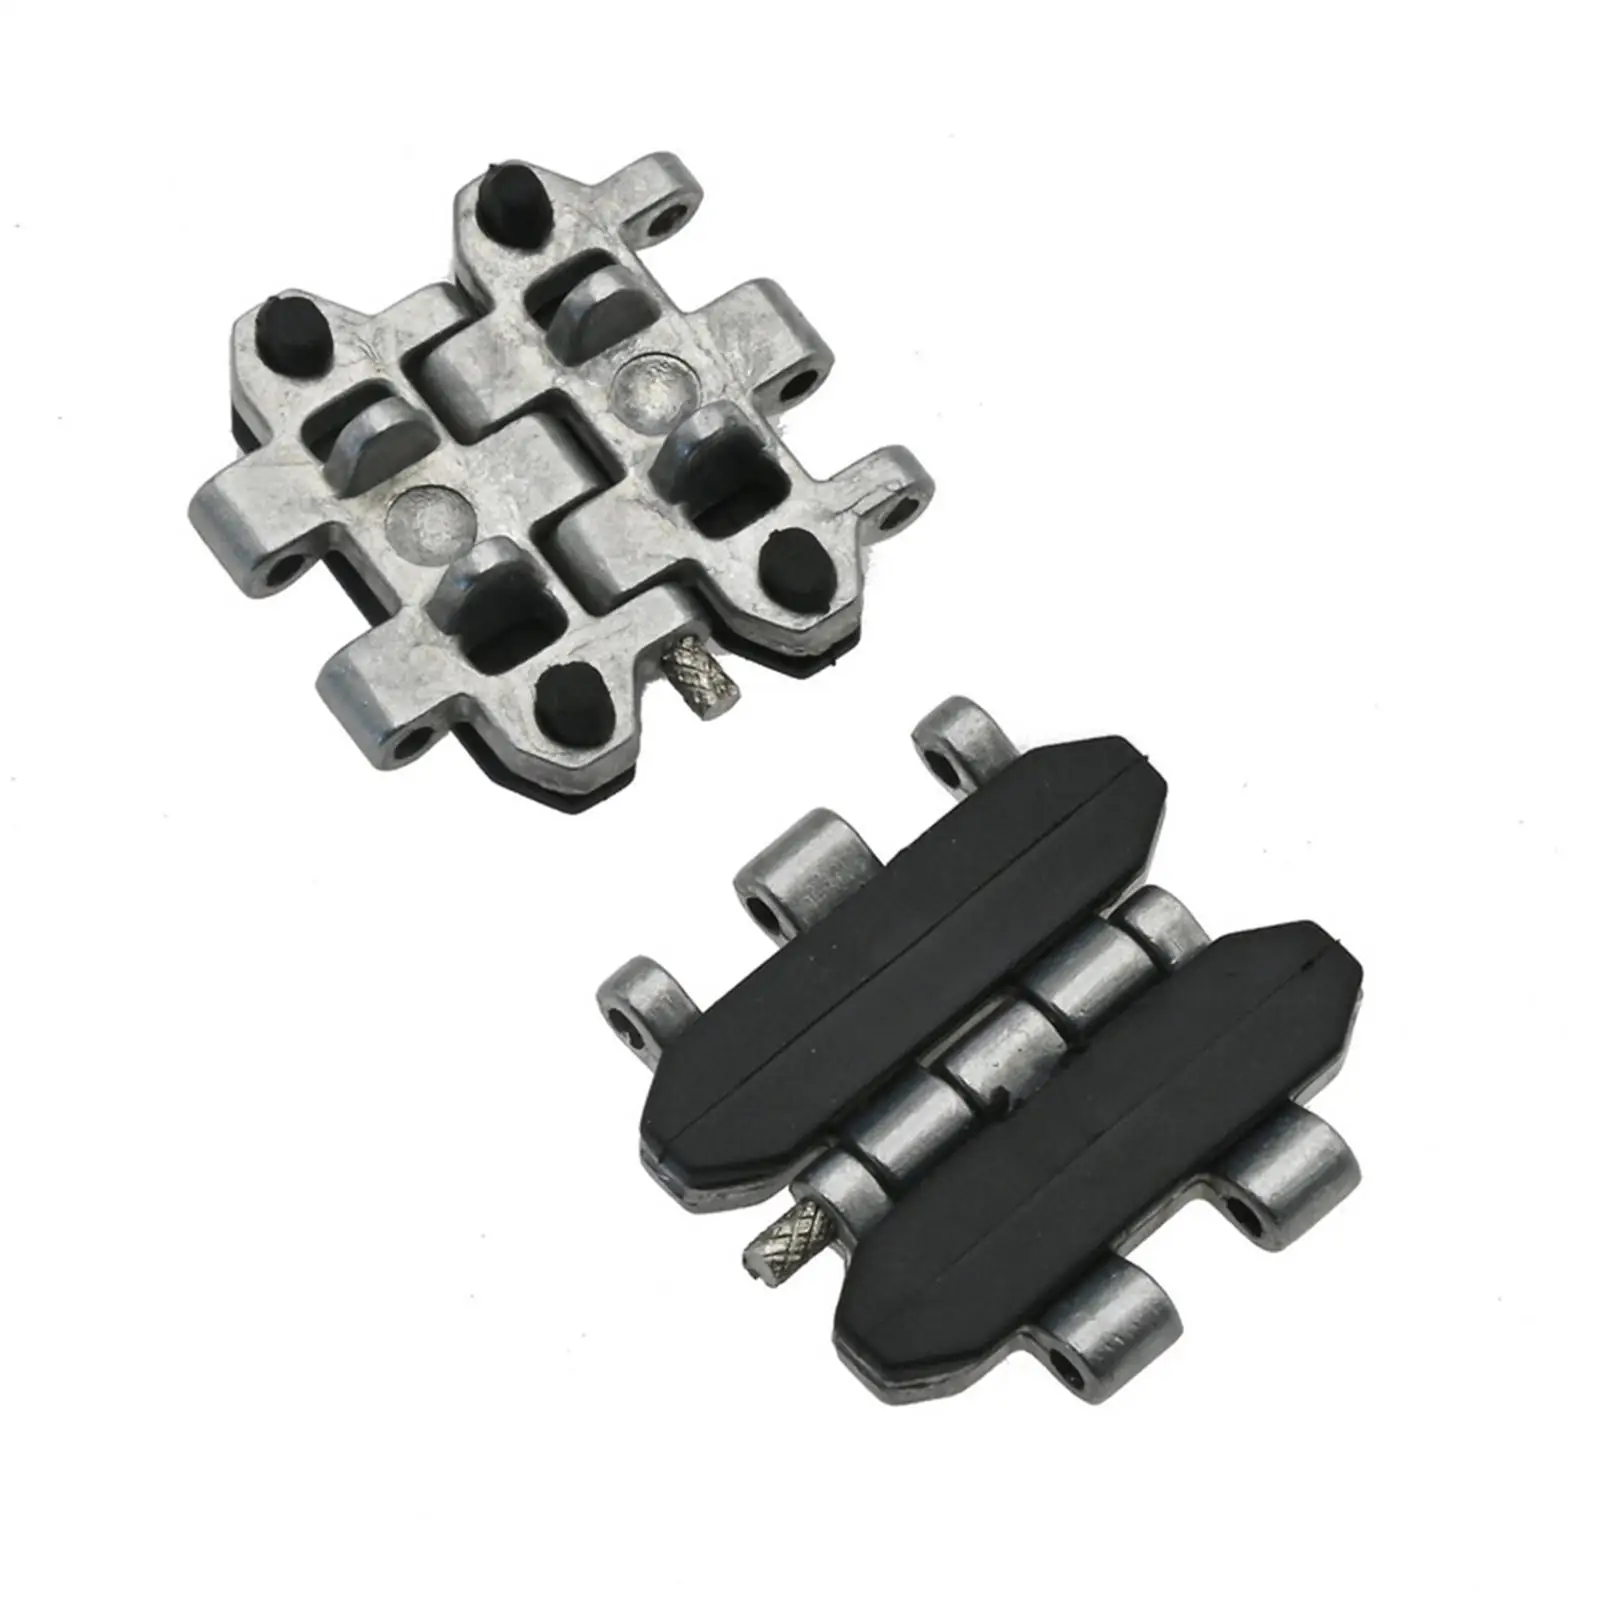 1:16 Scale RC Clawler Chains Spare Parts Replacement Accesories RC Tank Toy Accessory for Tracked Vehicle RC Clawler DIY Accs